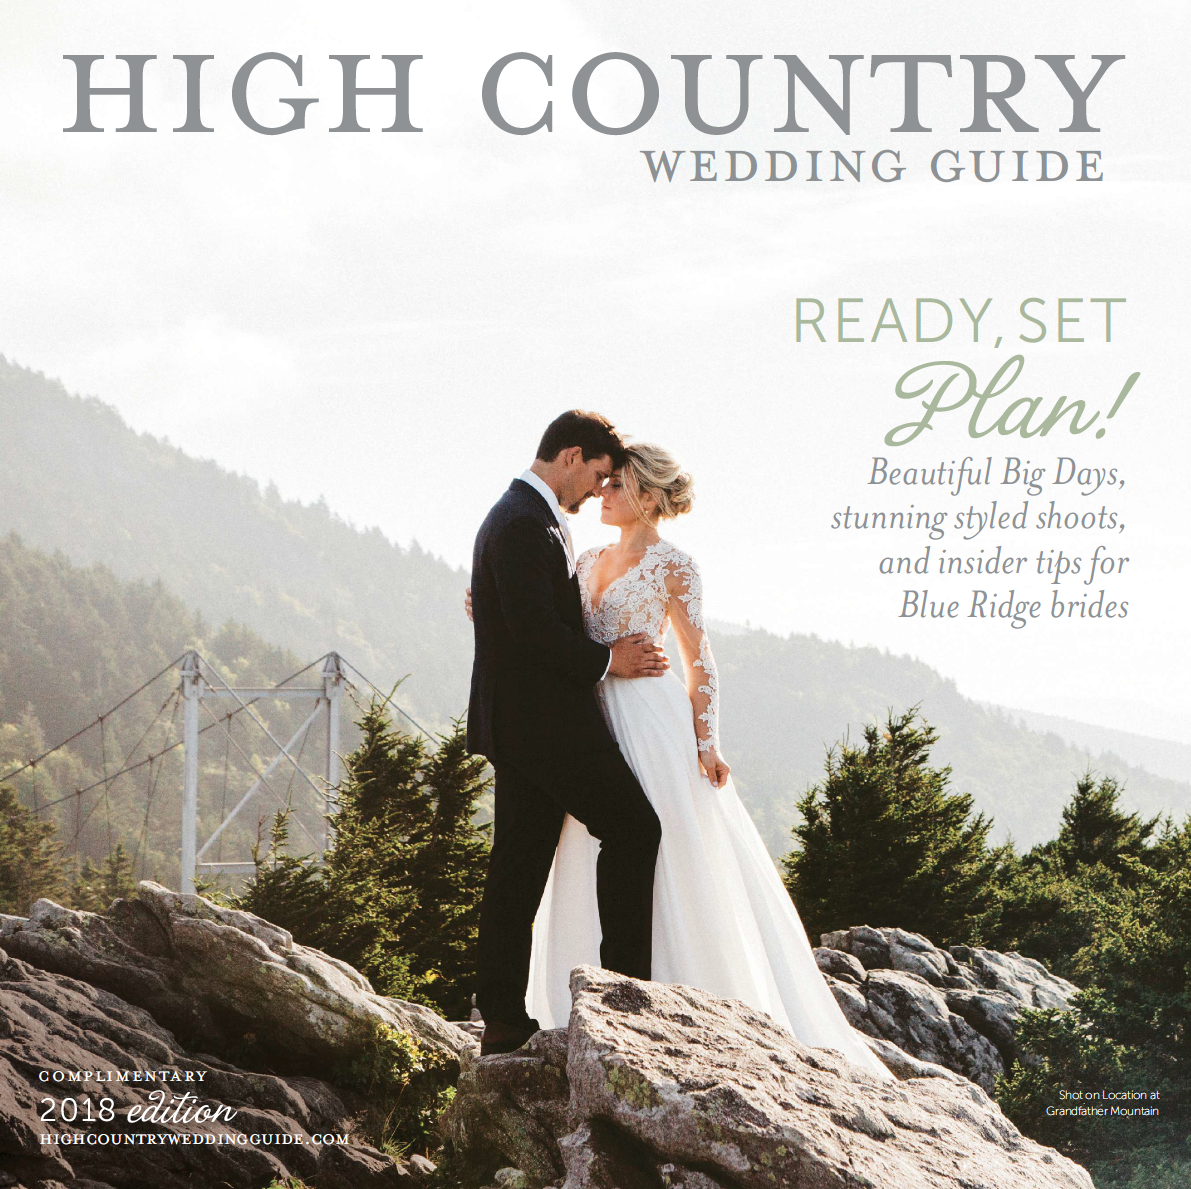 Bekah + Morrison's Wedding Featured in the High Country Wedding Guide 2018 Issue www.revivalphotography.com